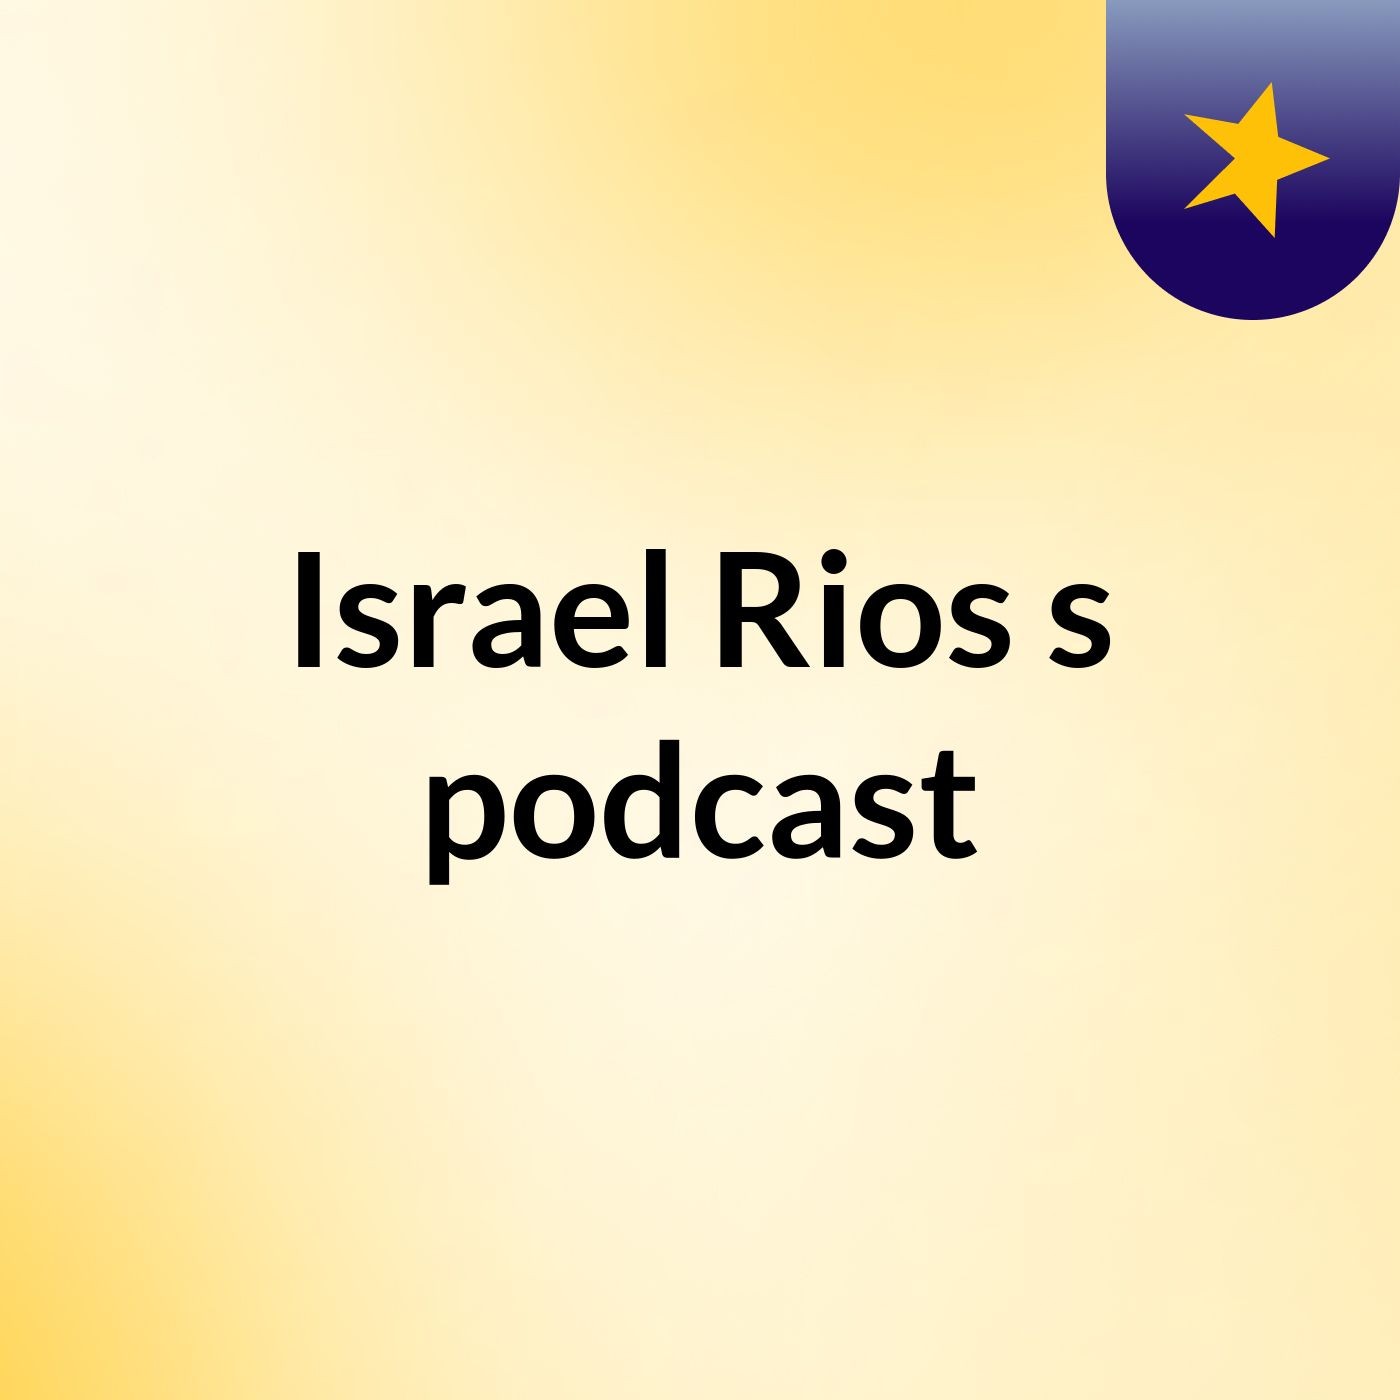 Israel Rios's podcast